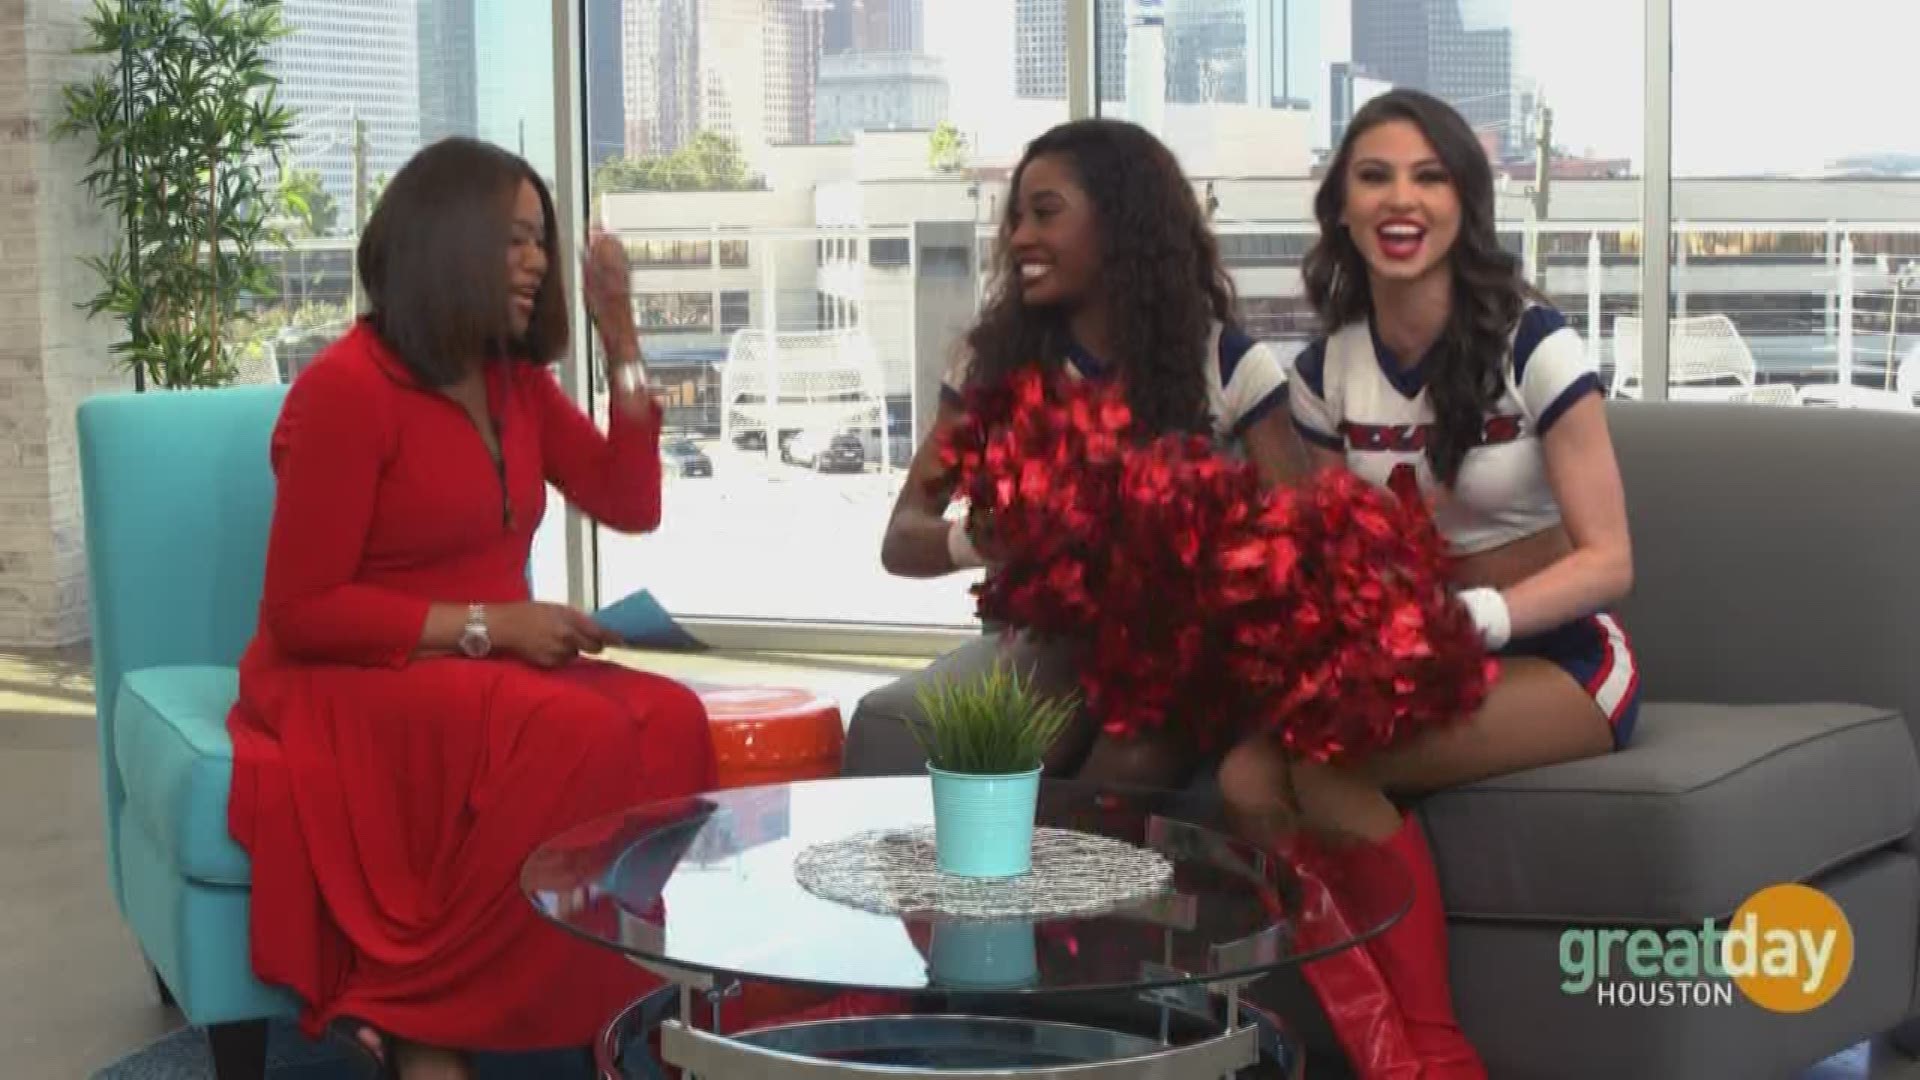 Datassia and Sierra give us insider tips and tricks on trying out for the Houston Texans Cheerleaders